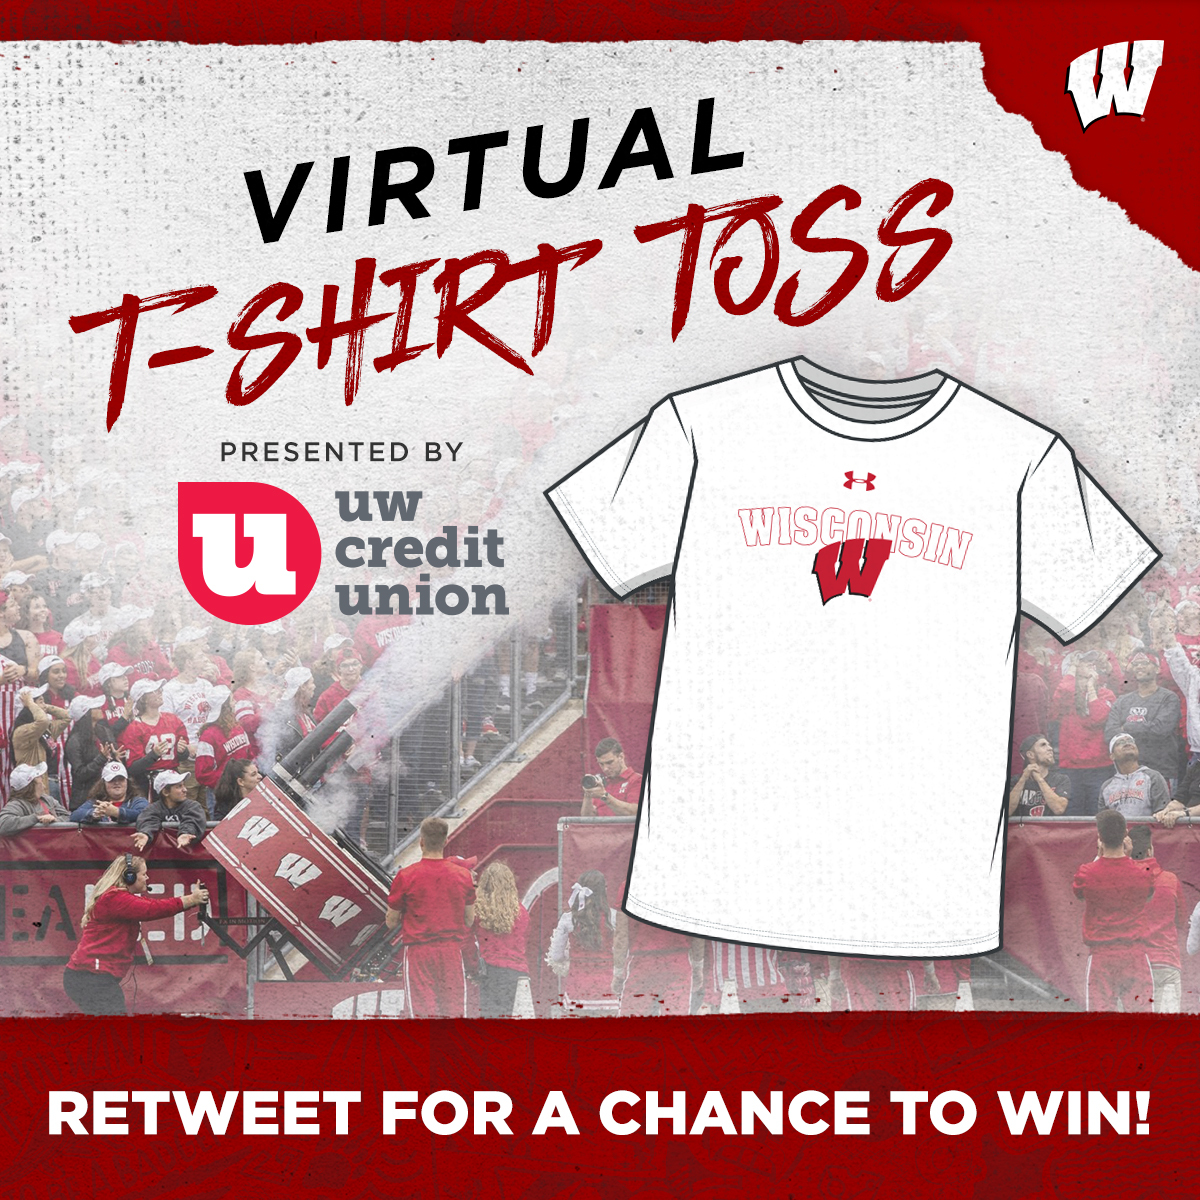 🙌 @UWCreditUnion T-Shirt Toss! Couldn't be at BadgerMBB tonight? Retweet and follow for a chance to win a FREE Wisconsin t-shirt! 💯